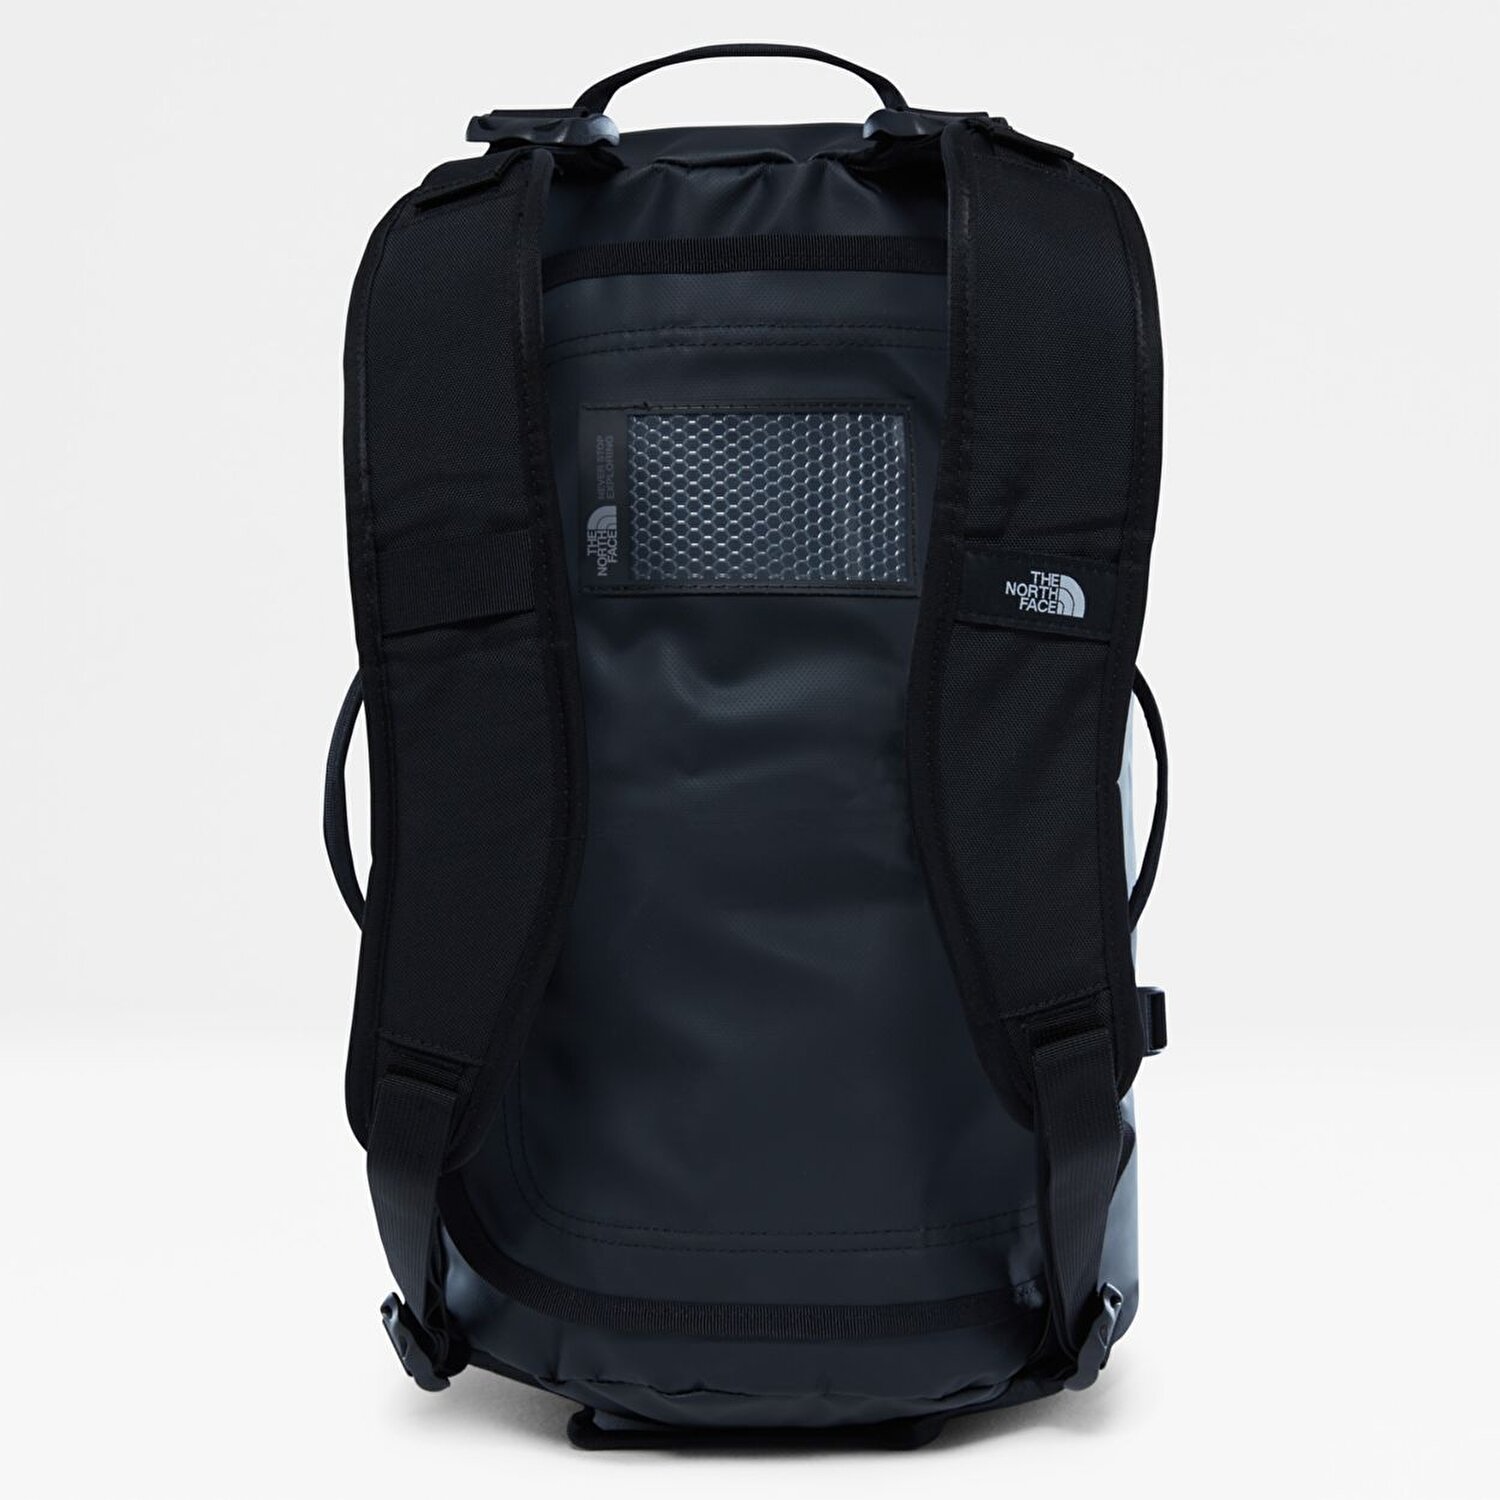 The North Face BASE CAMP DUFFEL - XS. 2